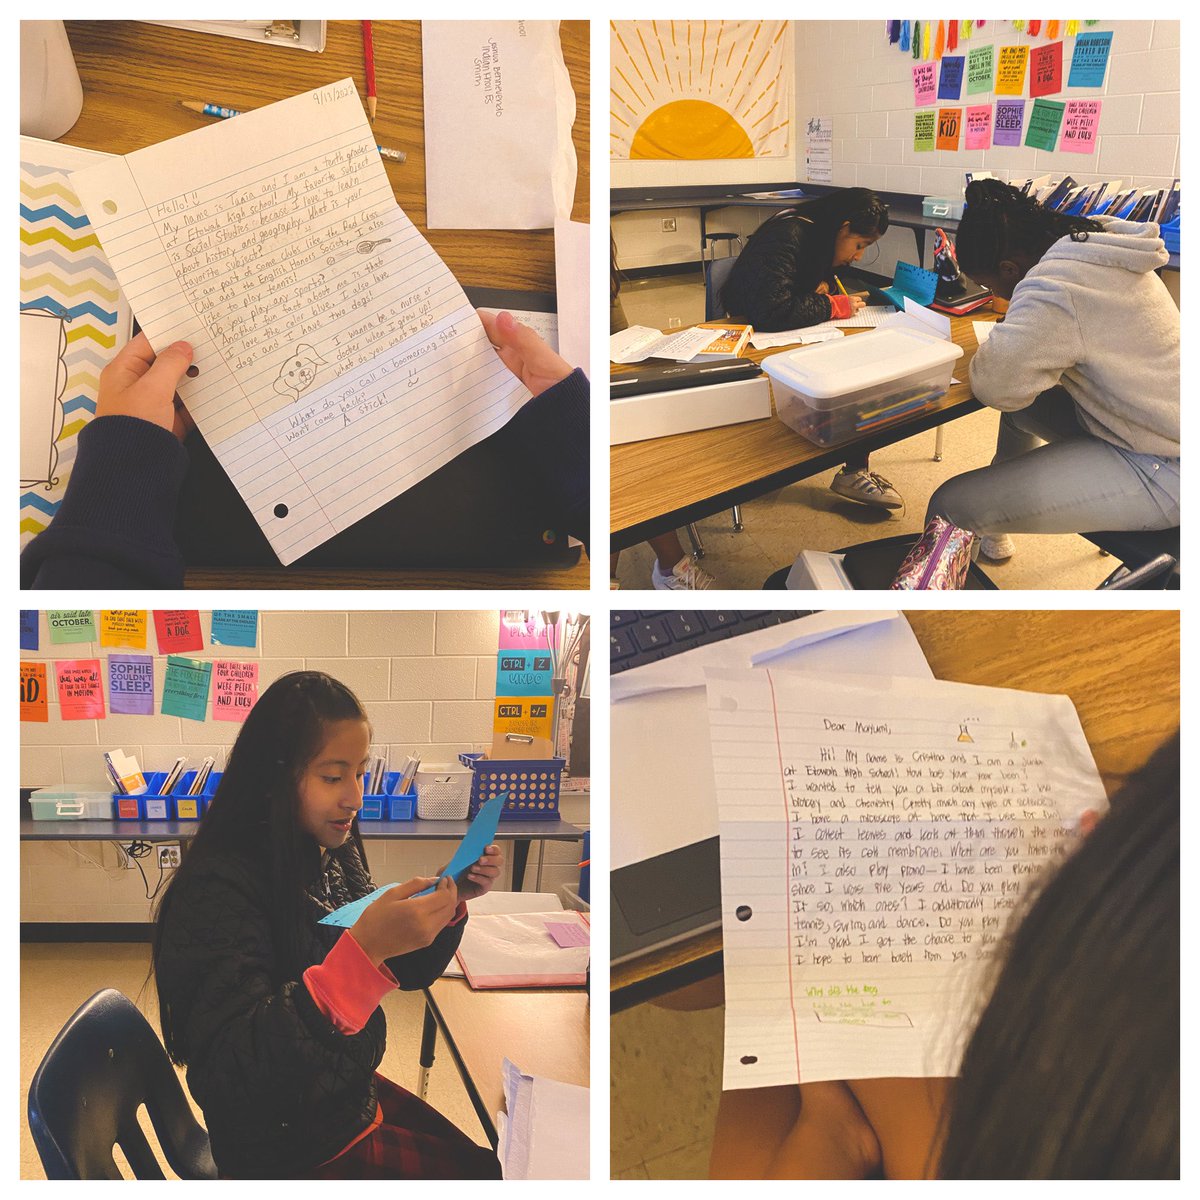 We are loving our letters from @EtowahHS Pen Pals! This is such a fun community-building opportunity! 📝💌📫 @IndianKnollES #IKESKindnessCounts